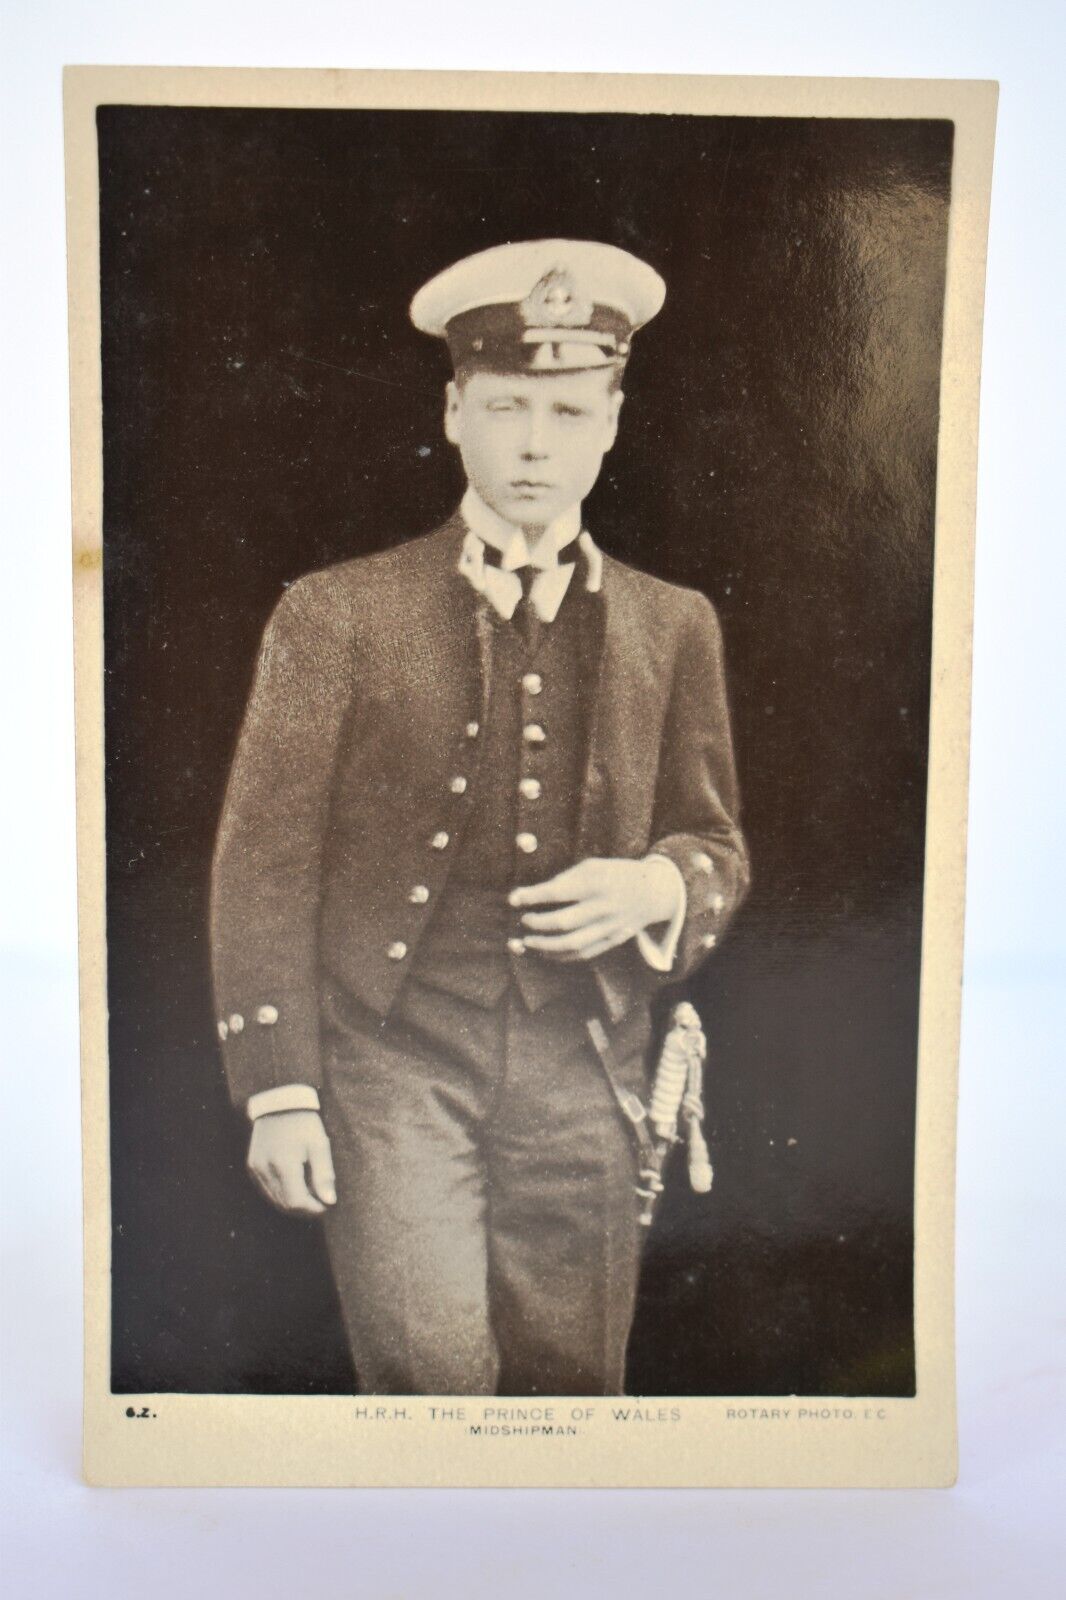 H.R.H The Prince Of Wales Midshipman Postcard Vintage Photograph Collectible Old